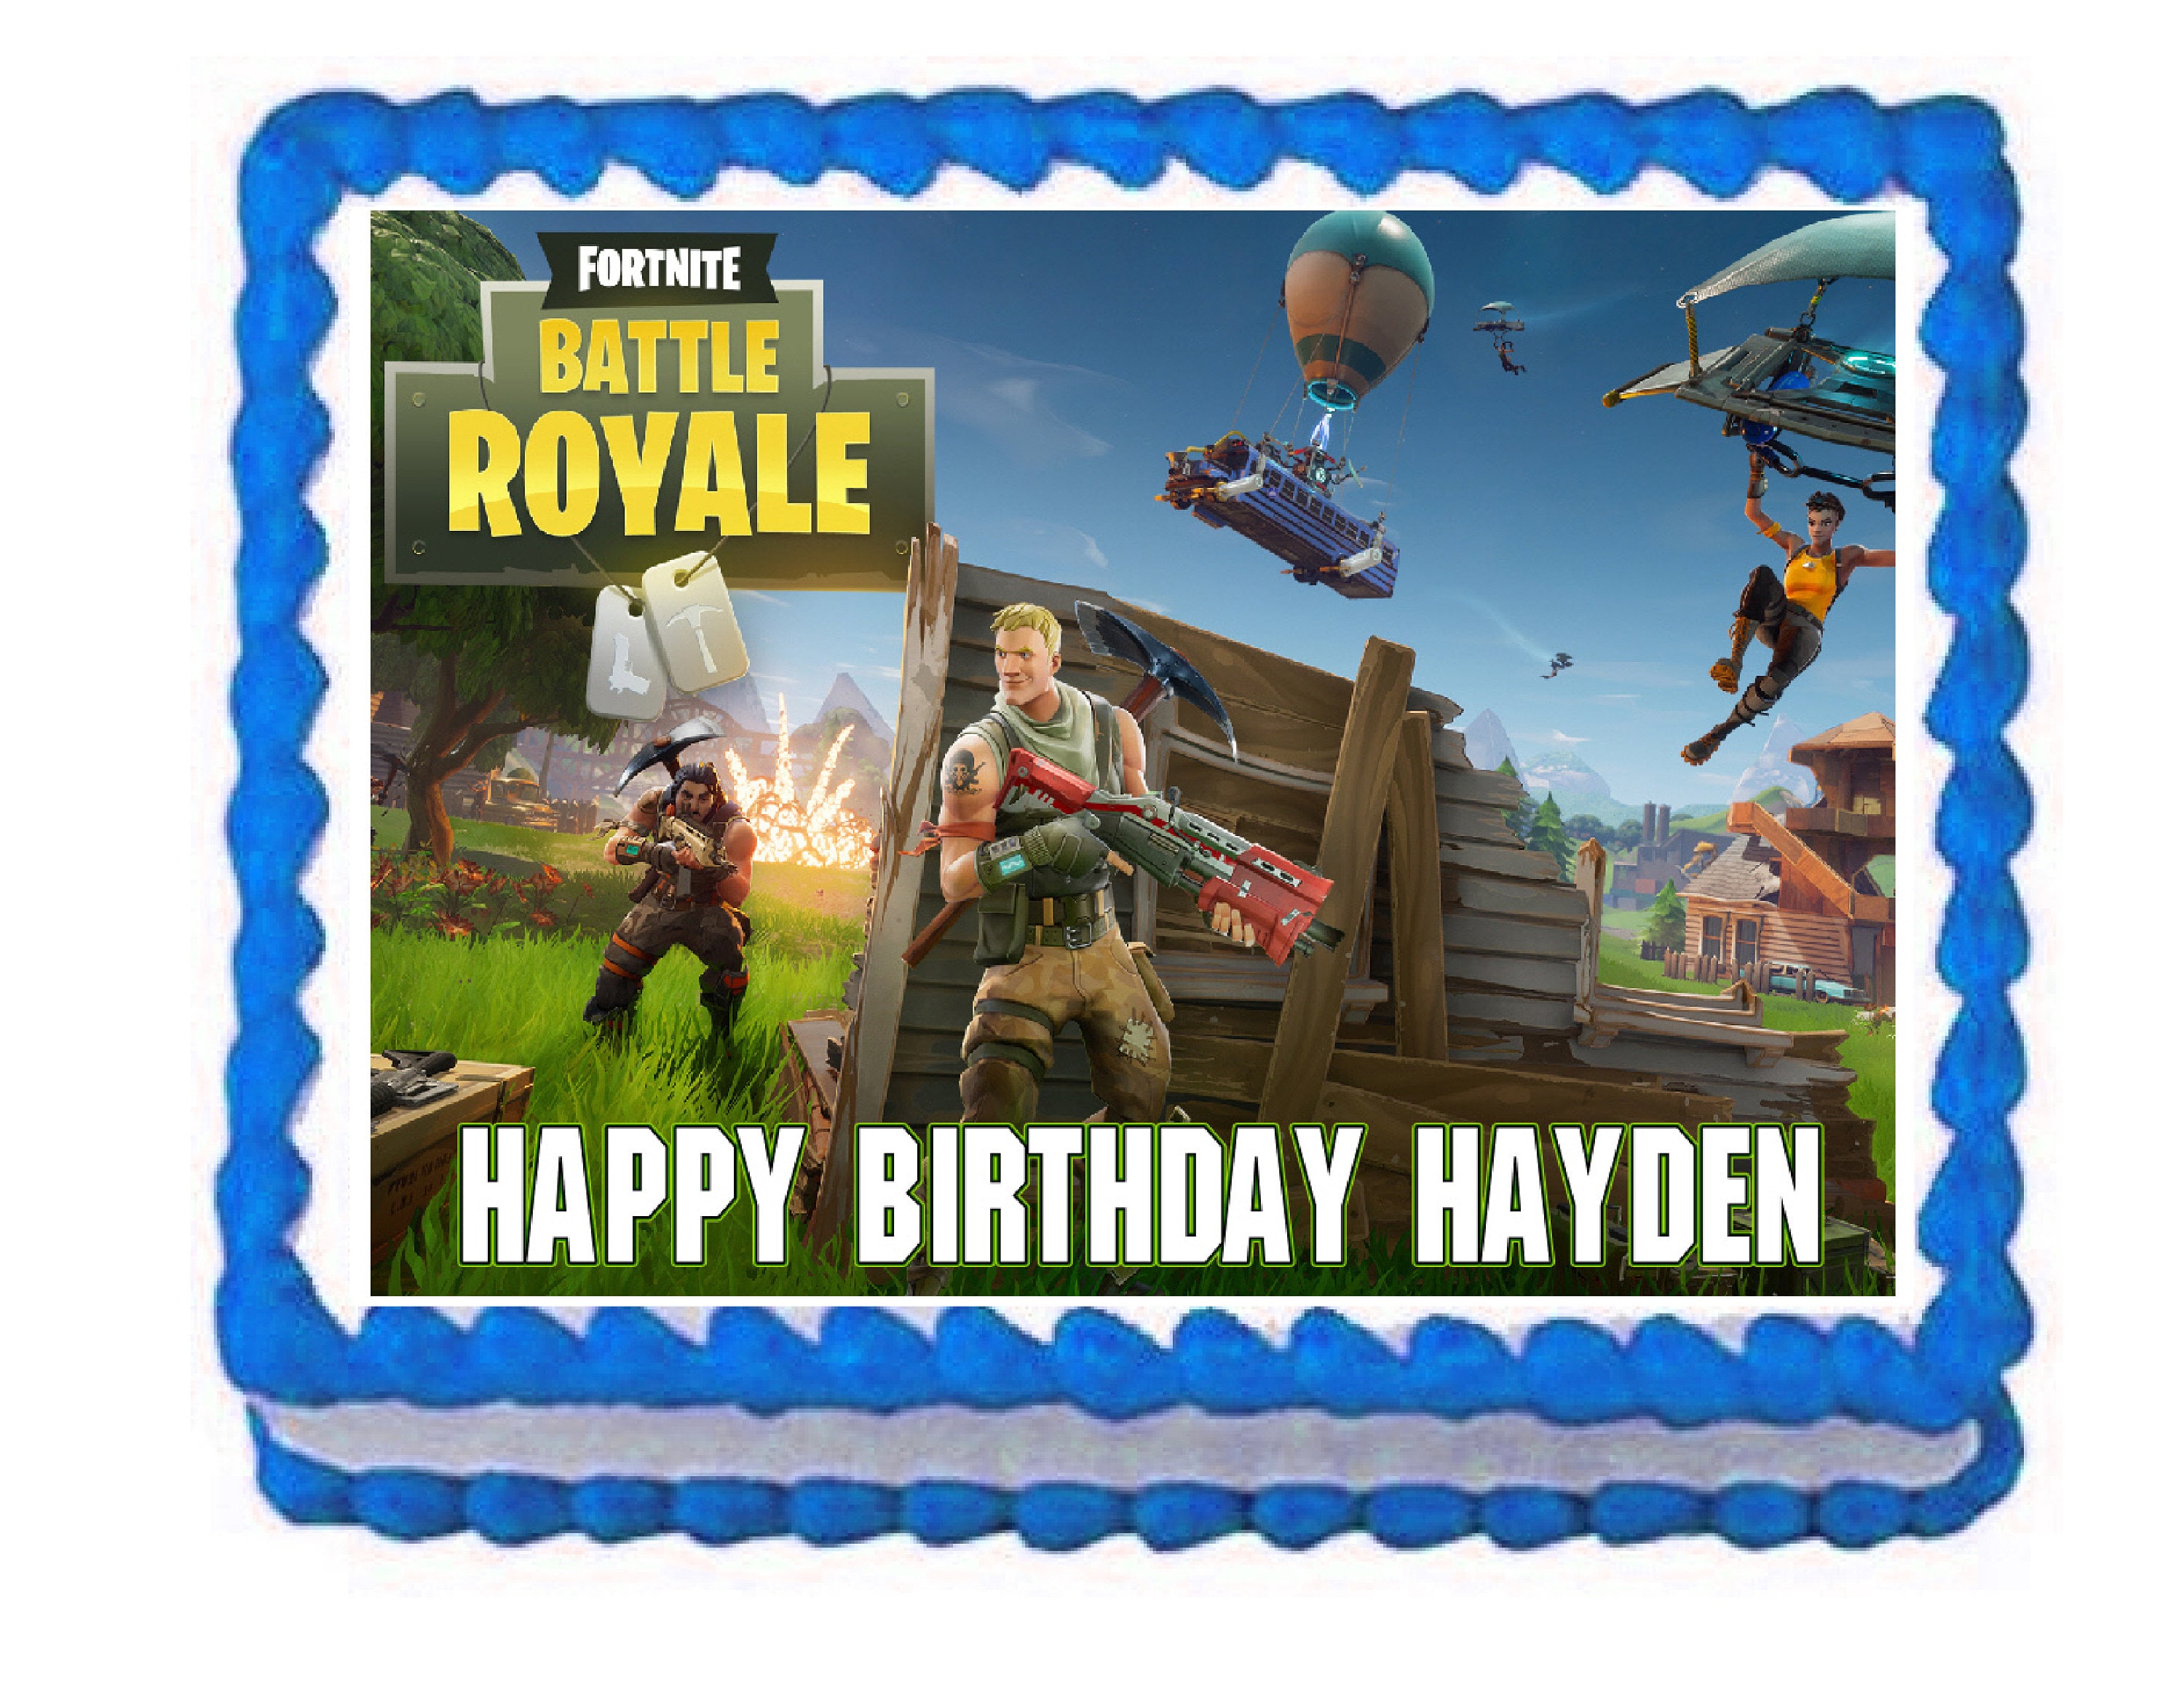 Fortnite party edible cake image cake topper frosting sheet